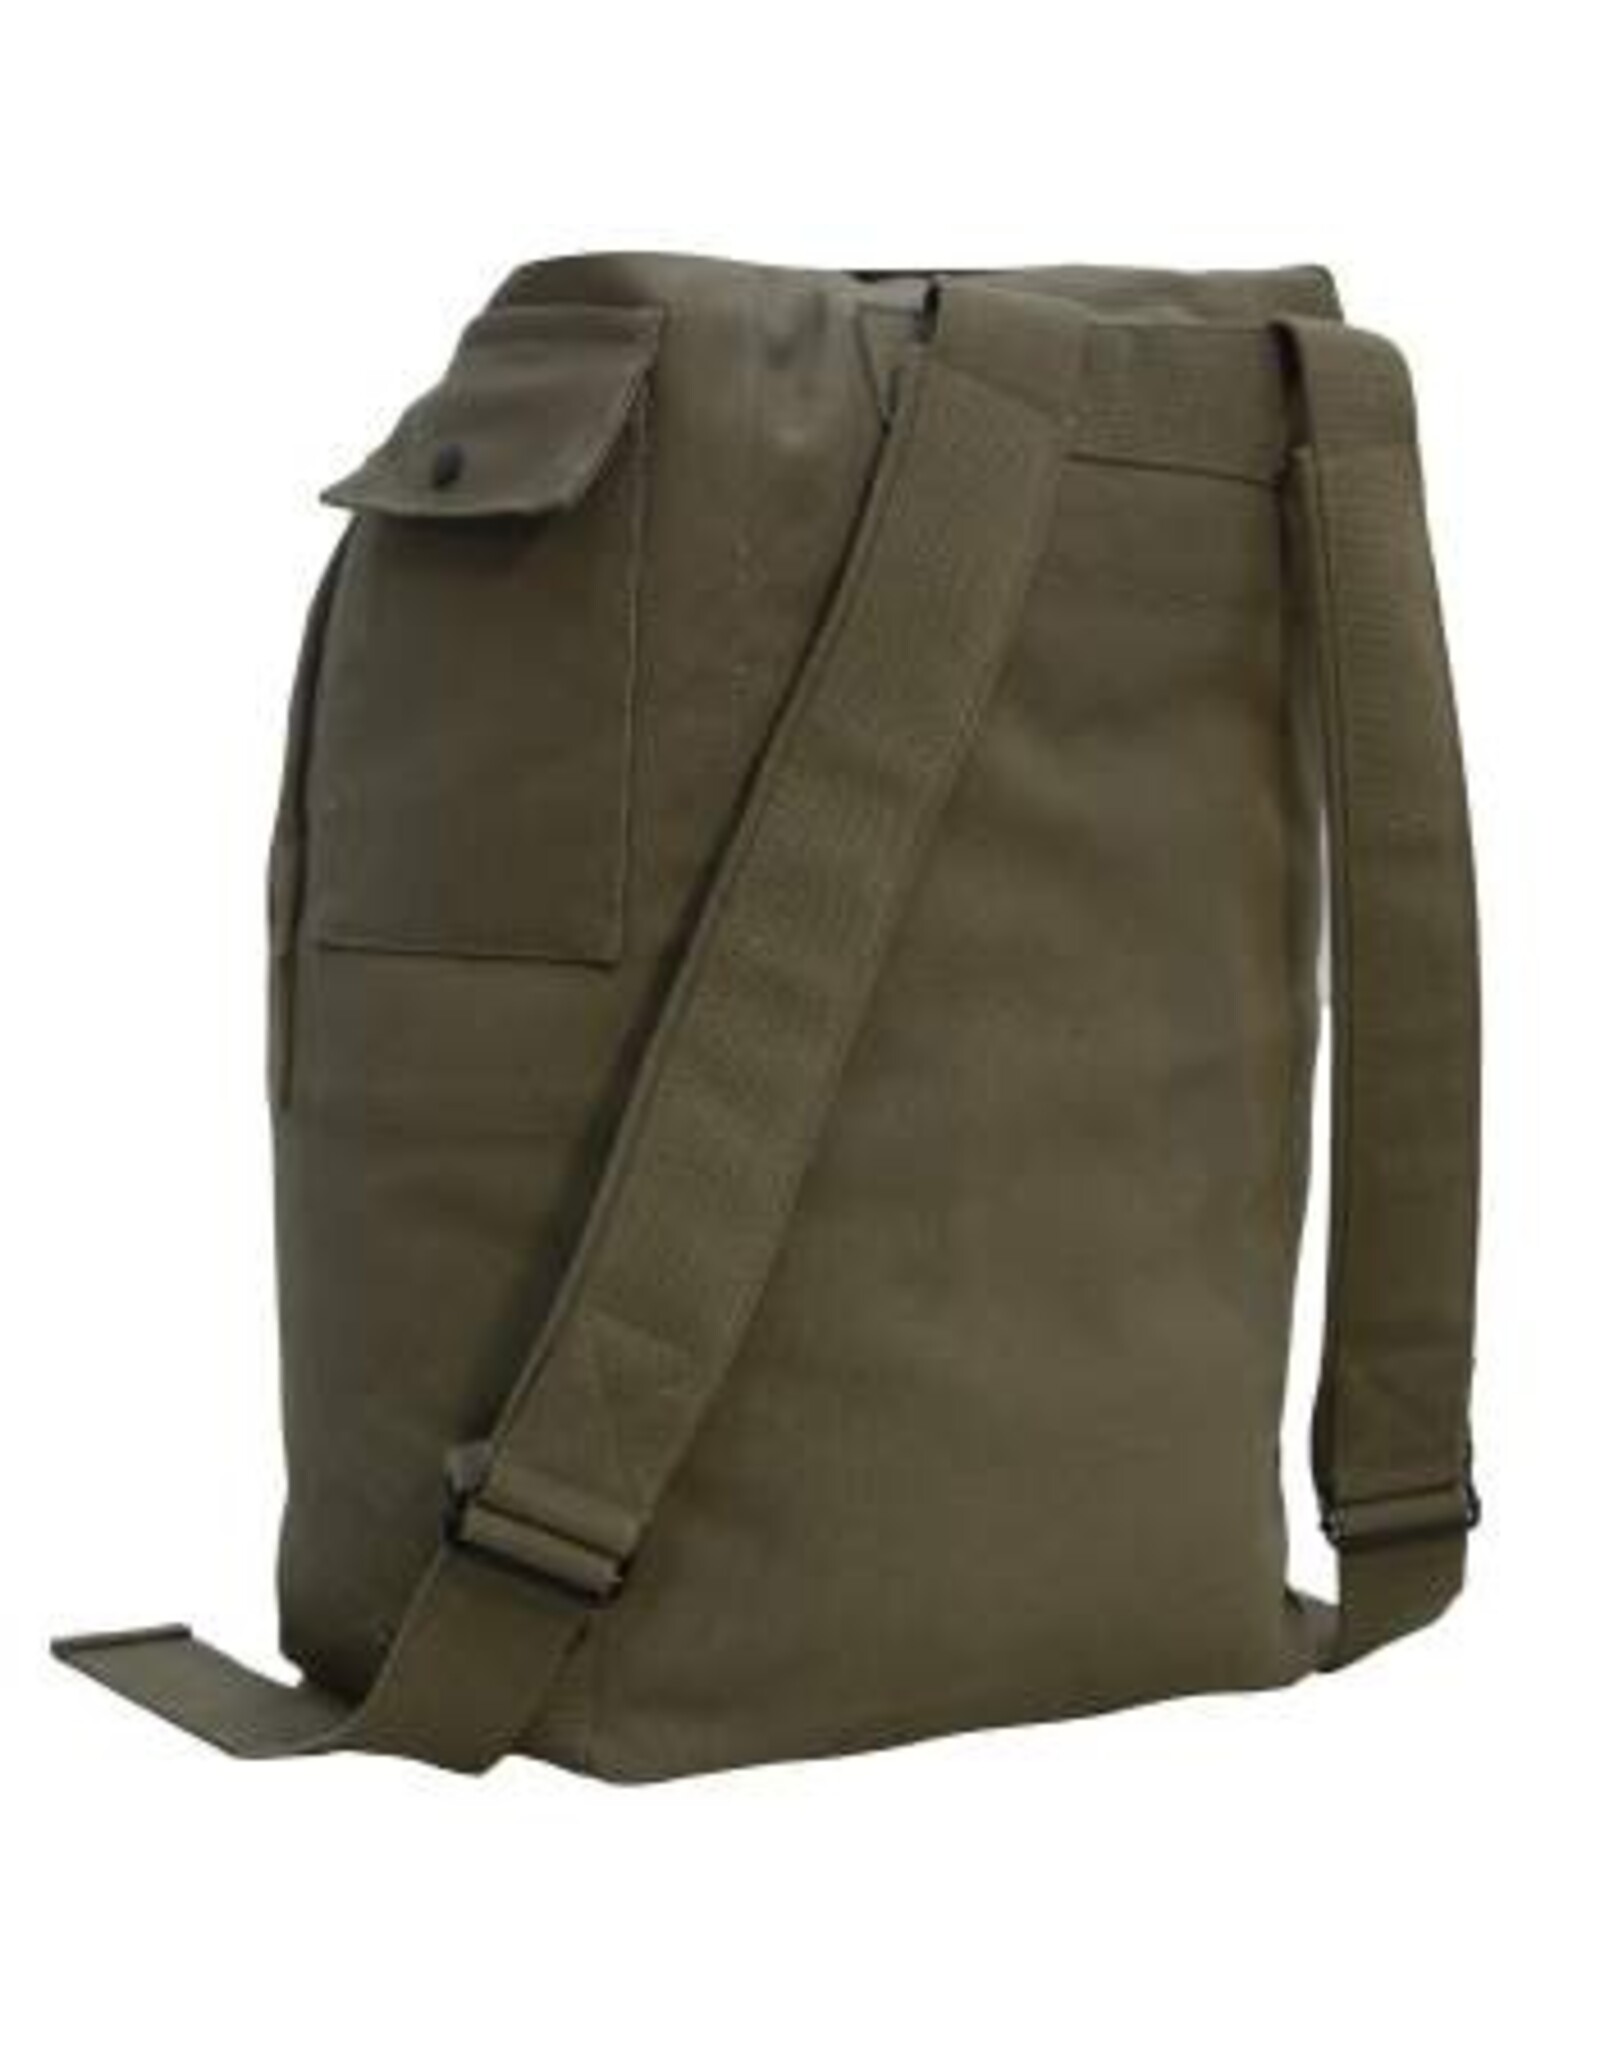 ROTHCO NOMAD CANVAS DUFFLE BACKPACK